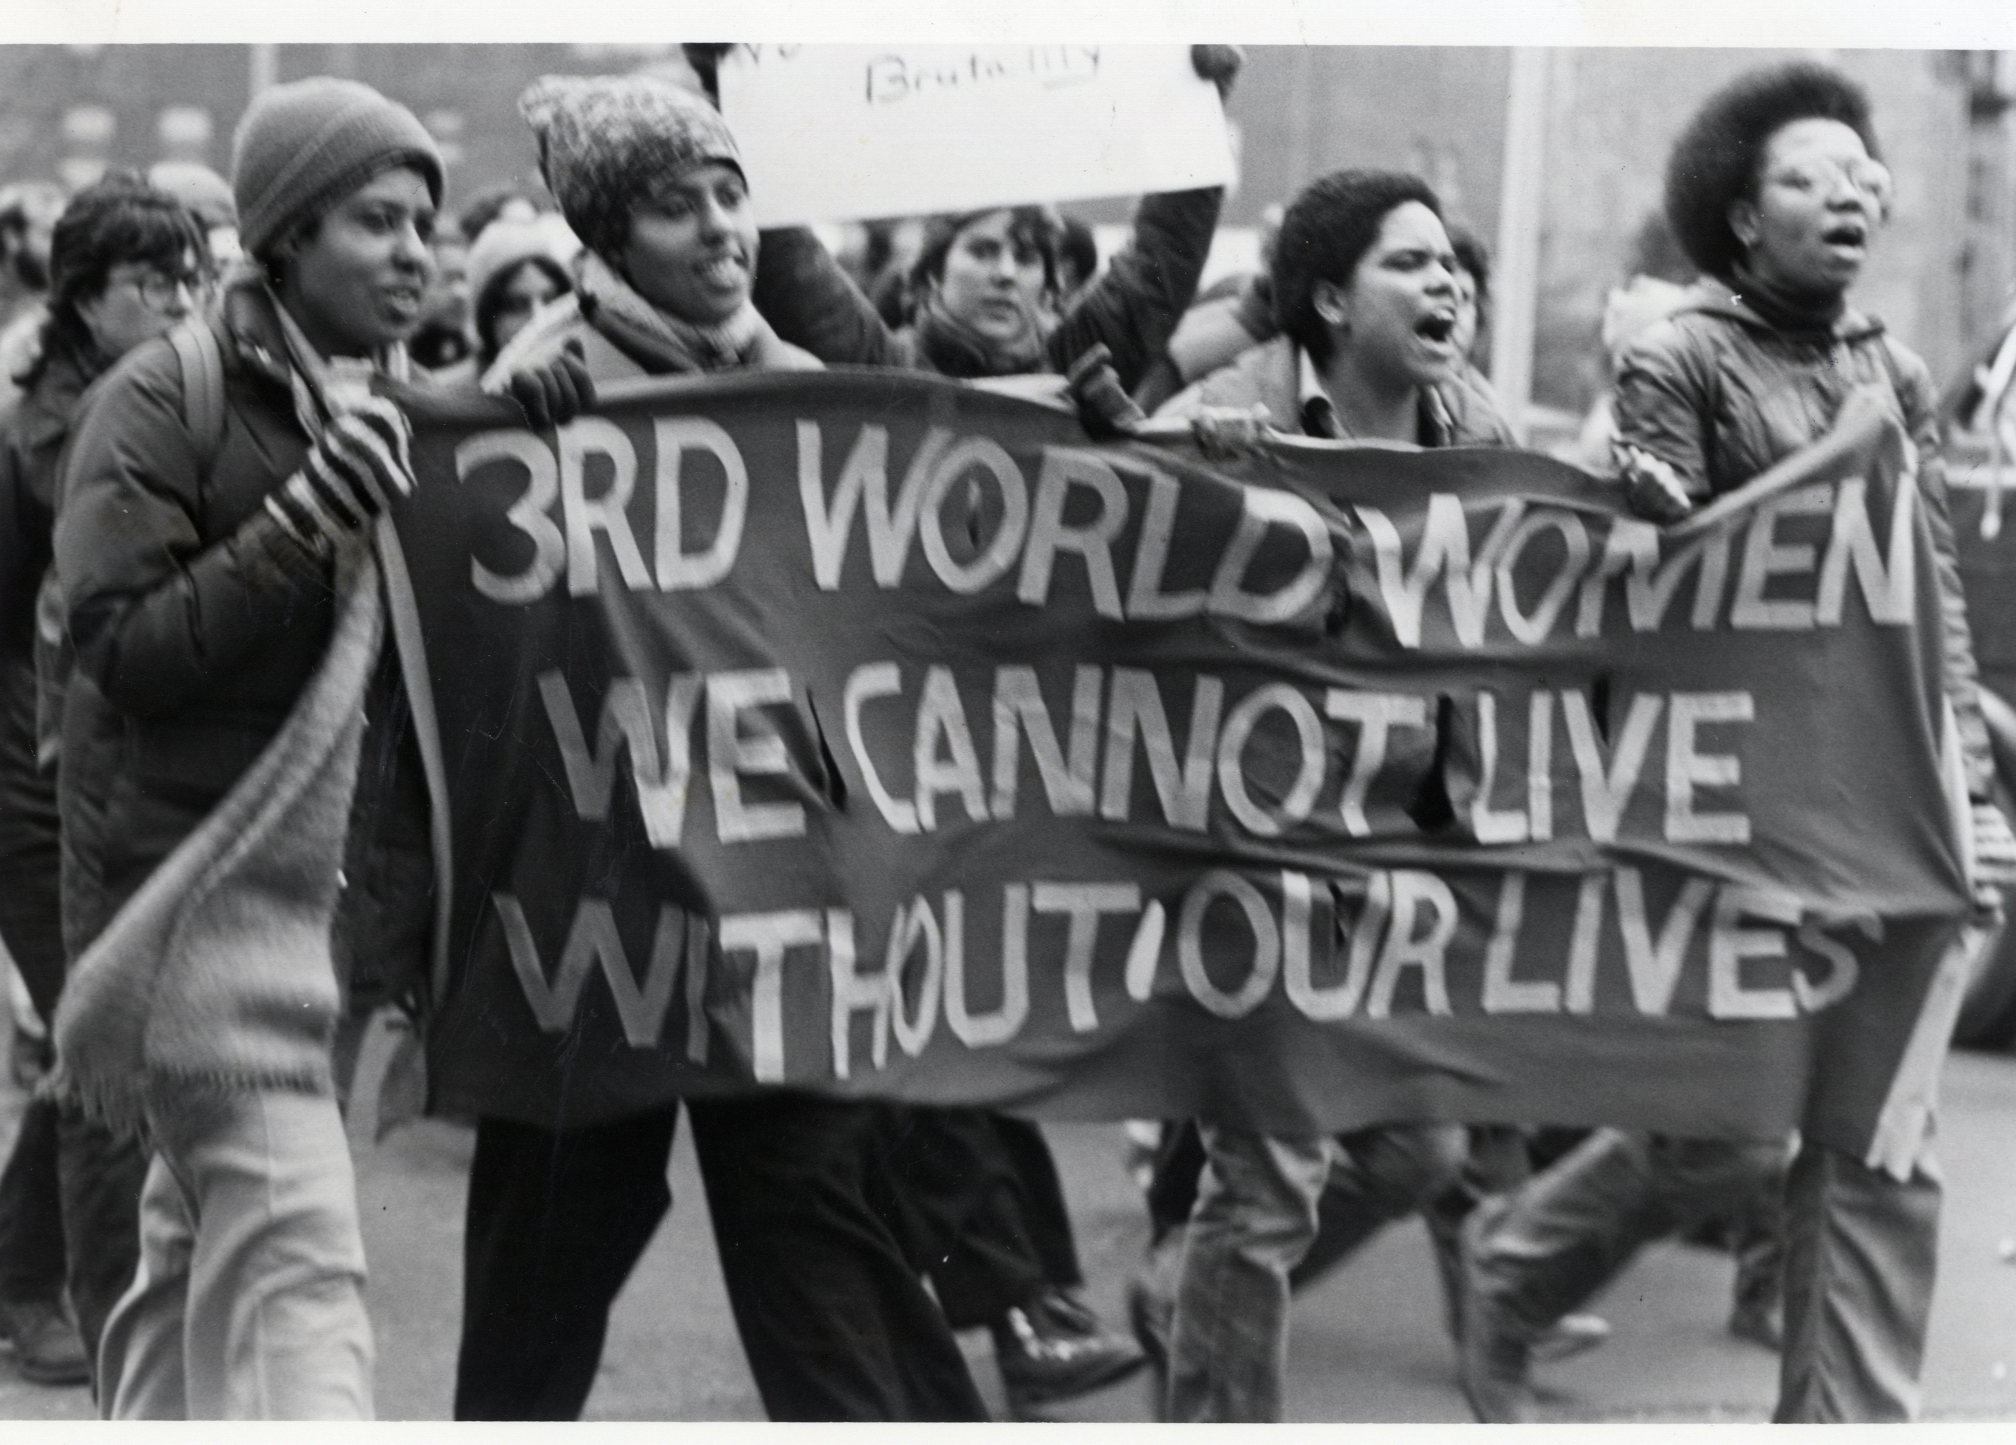 Members of the Combahee River Collective at a protest, 1979 or 1980